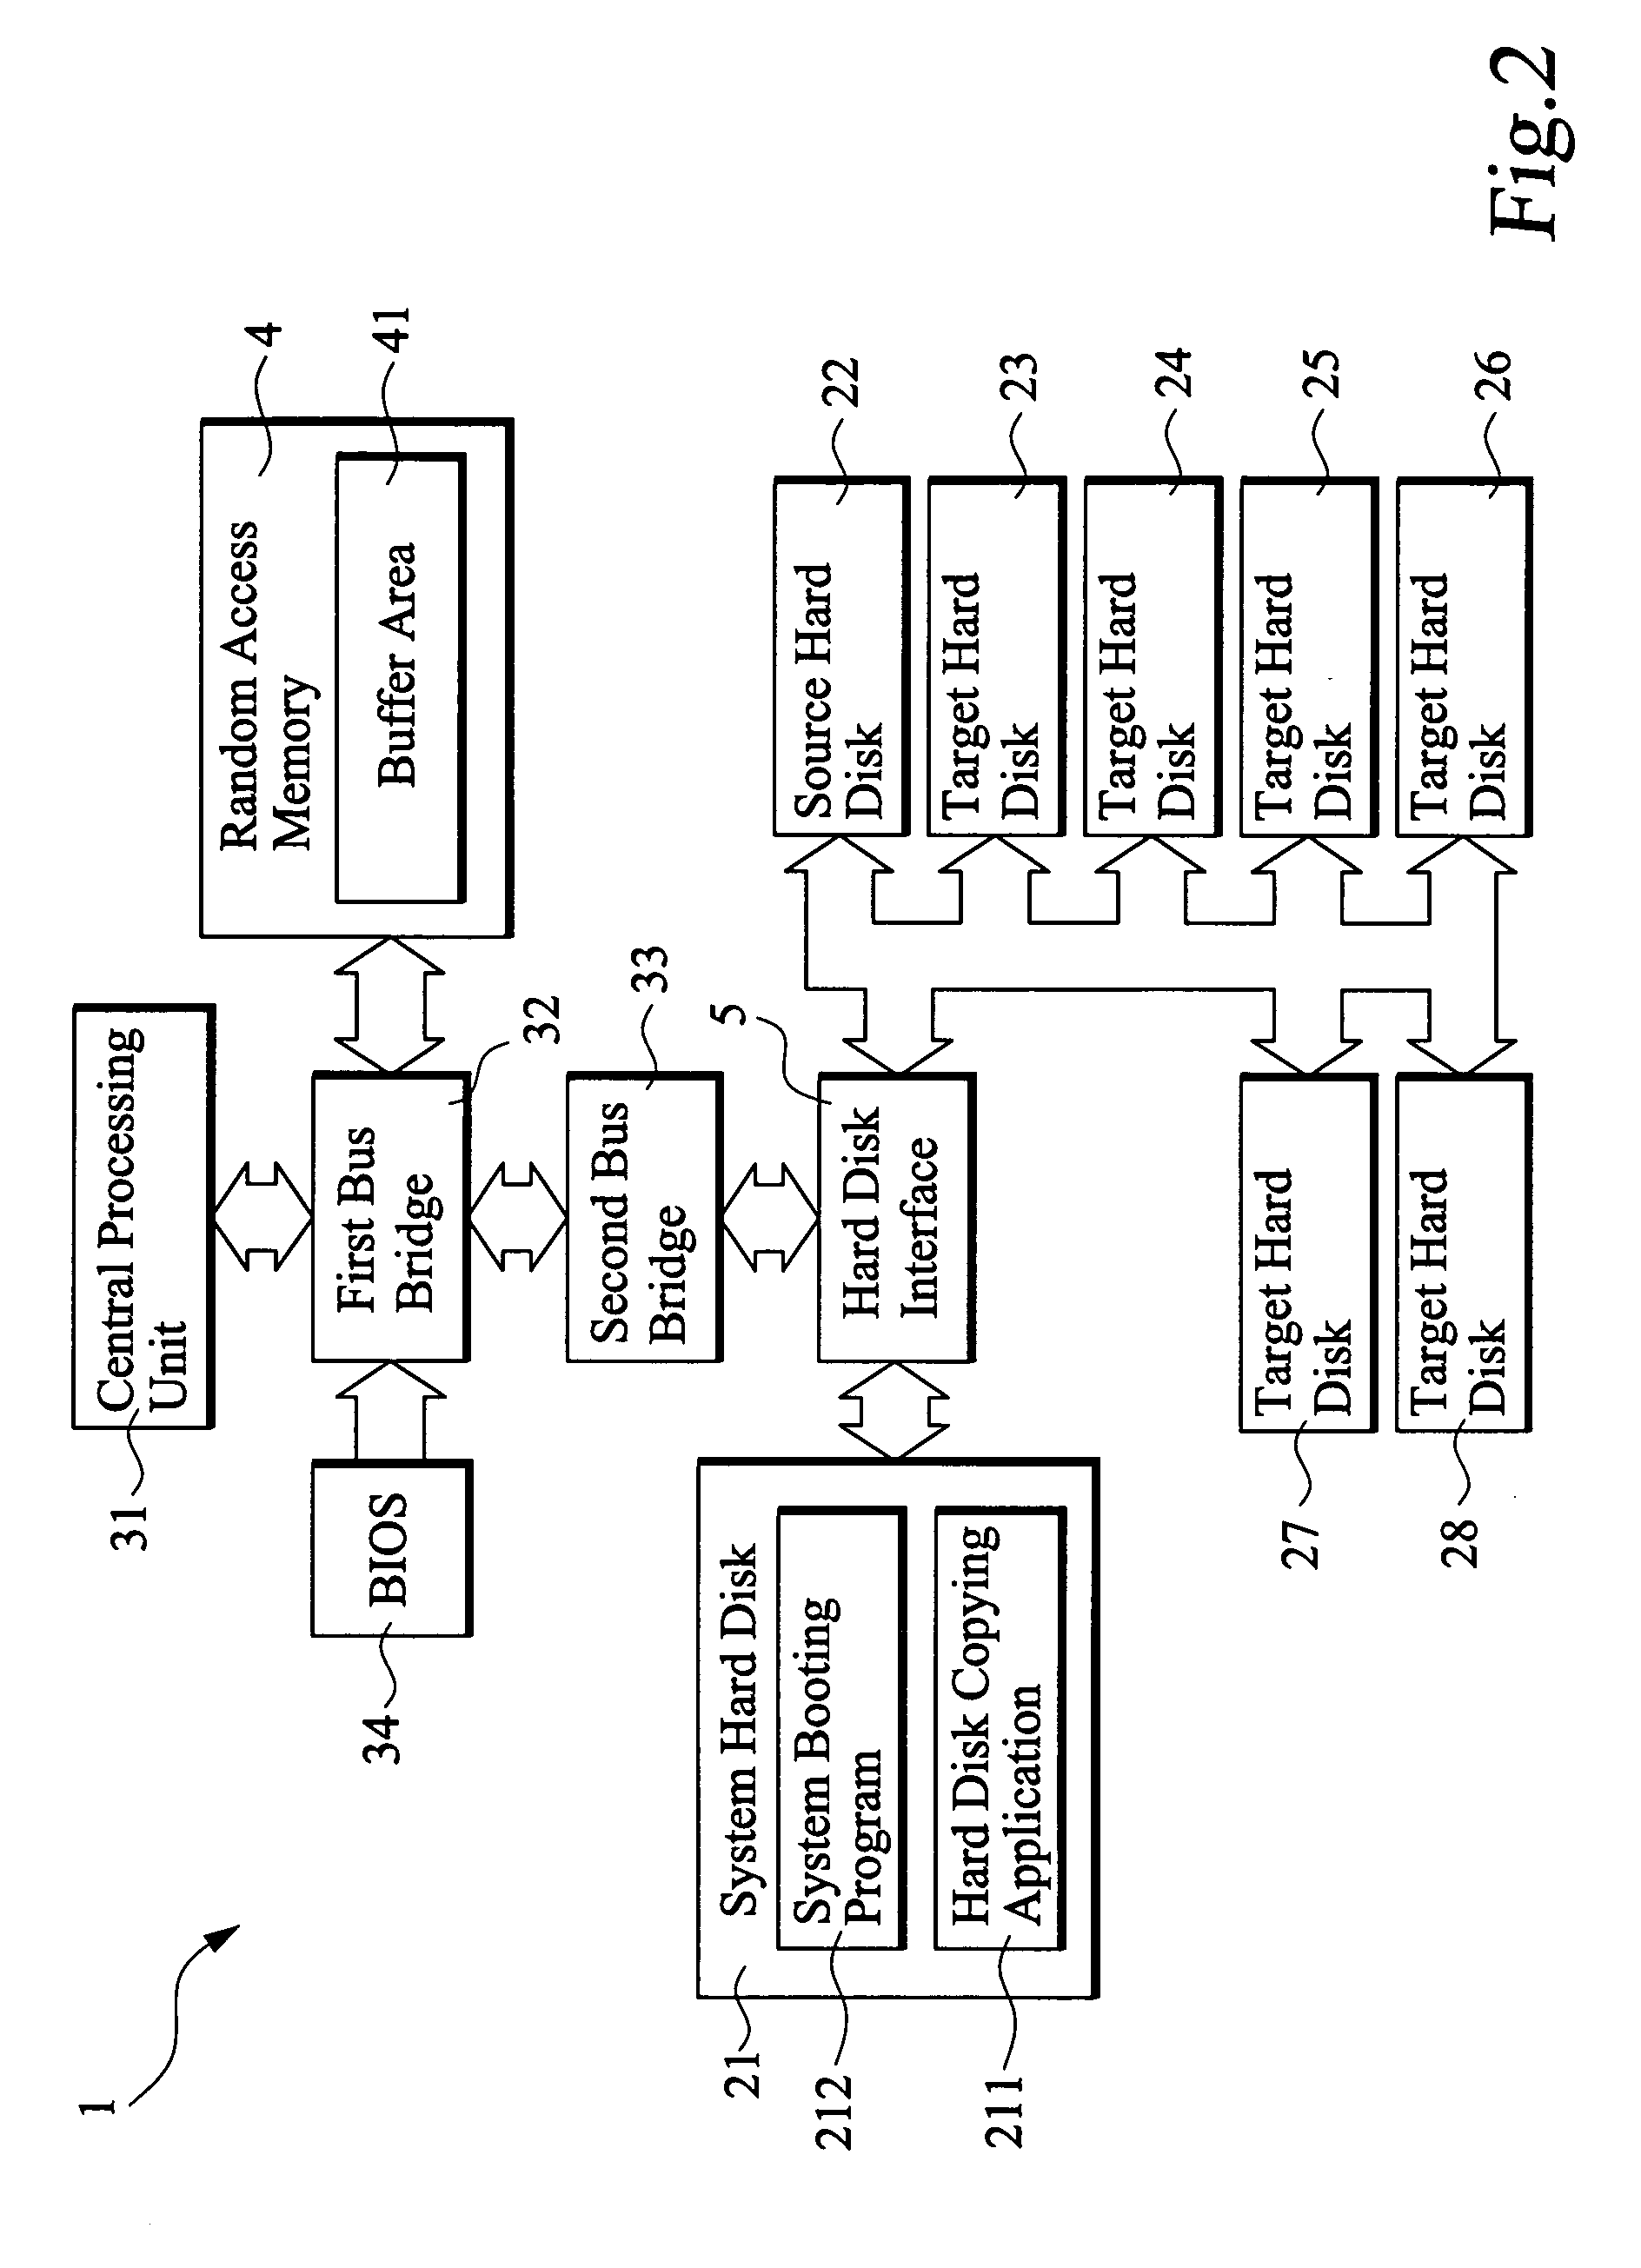 Method for copying source data from a source hard disk to multiple target hard disks